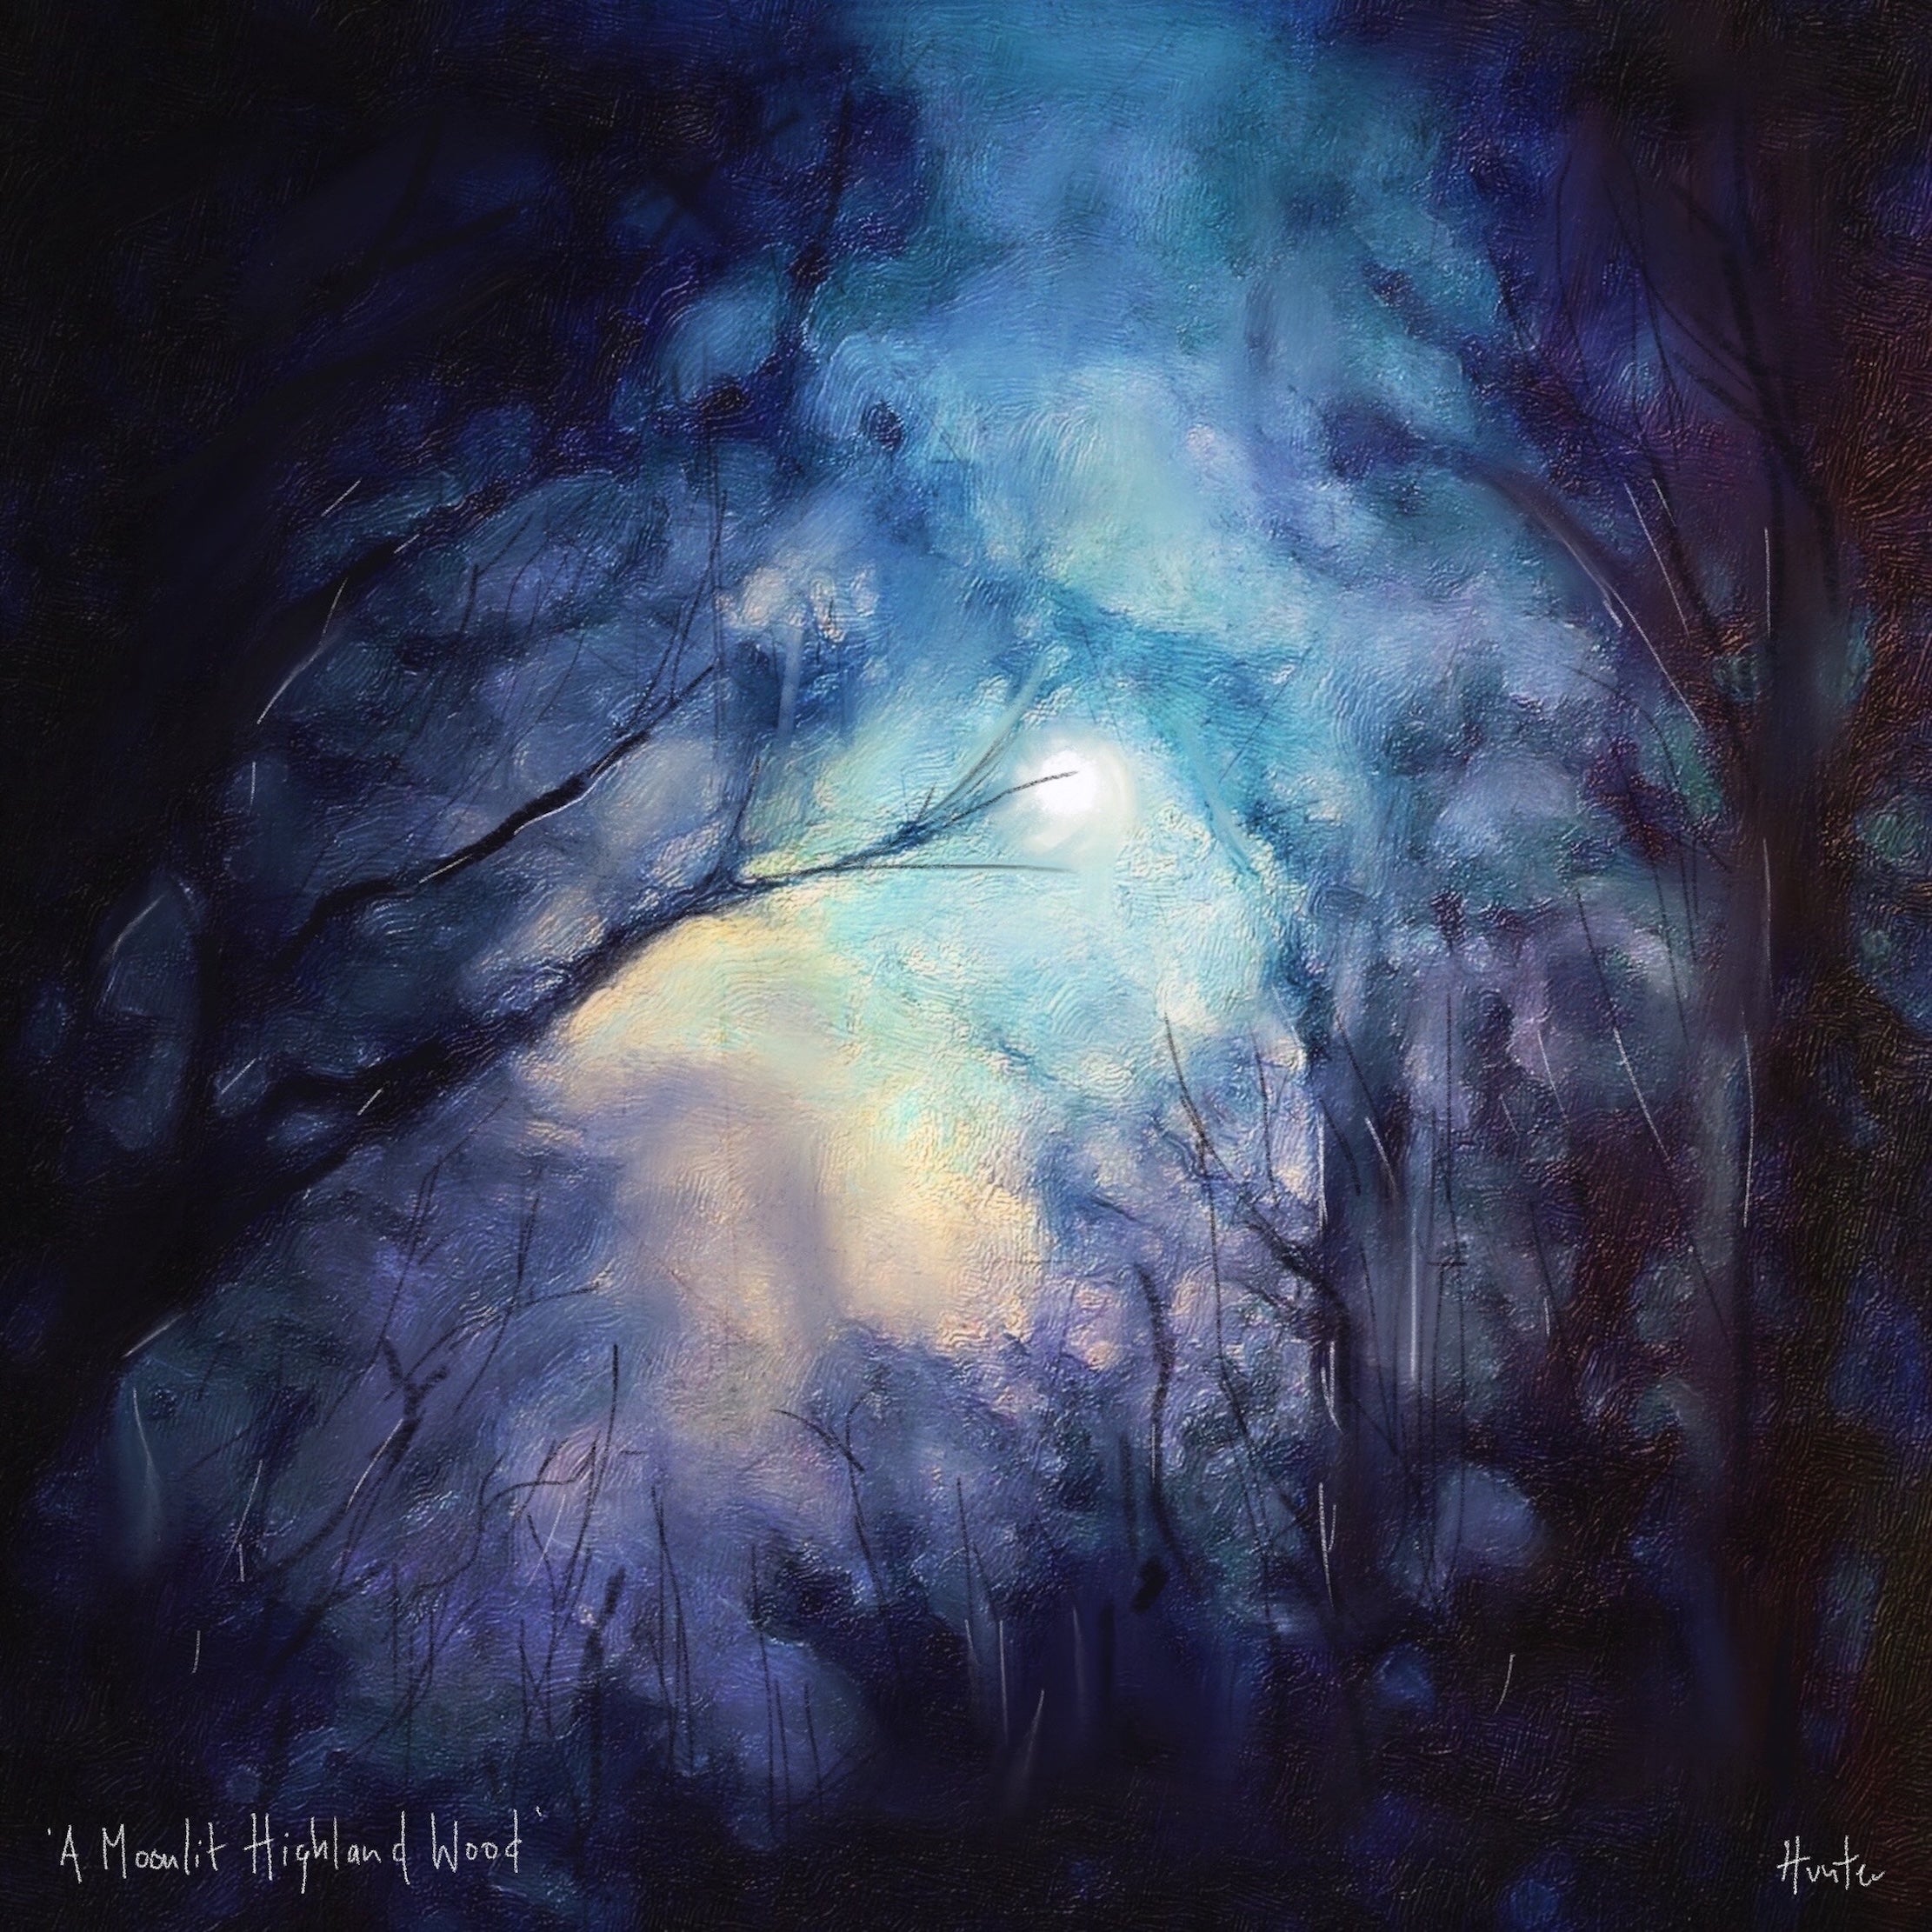 A Moonlit Highland Wood | Scotland In Your Pocket Art Print-Scotland In Your Pocket Framed Prints-Scottish Highlands & Lowlands Art Gallery-Mounted & Cello Bag: 12.5x12.5 cm-Black Frame-Paintings, Prints, Homeware, Art Gifts From Scotland By Scottish Artist Kevin Hunter